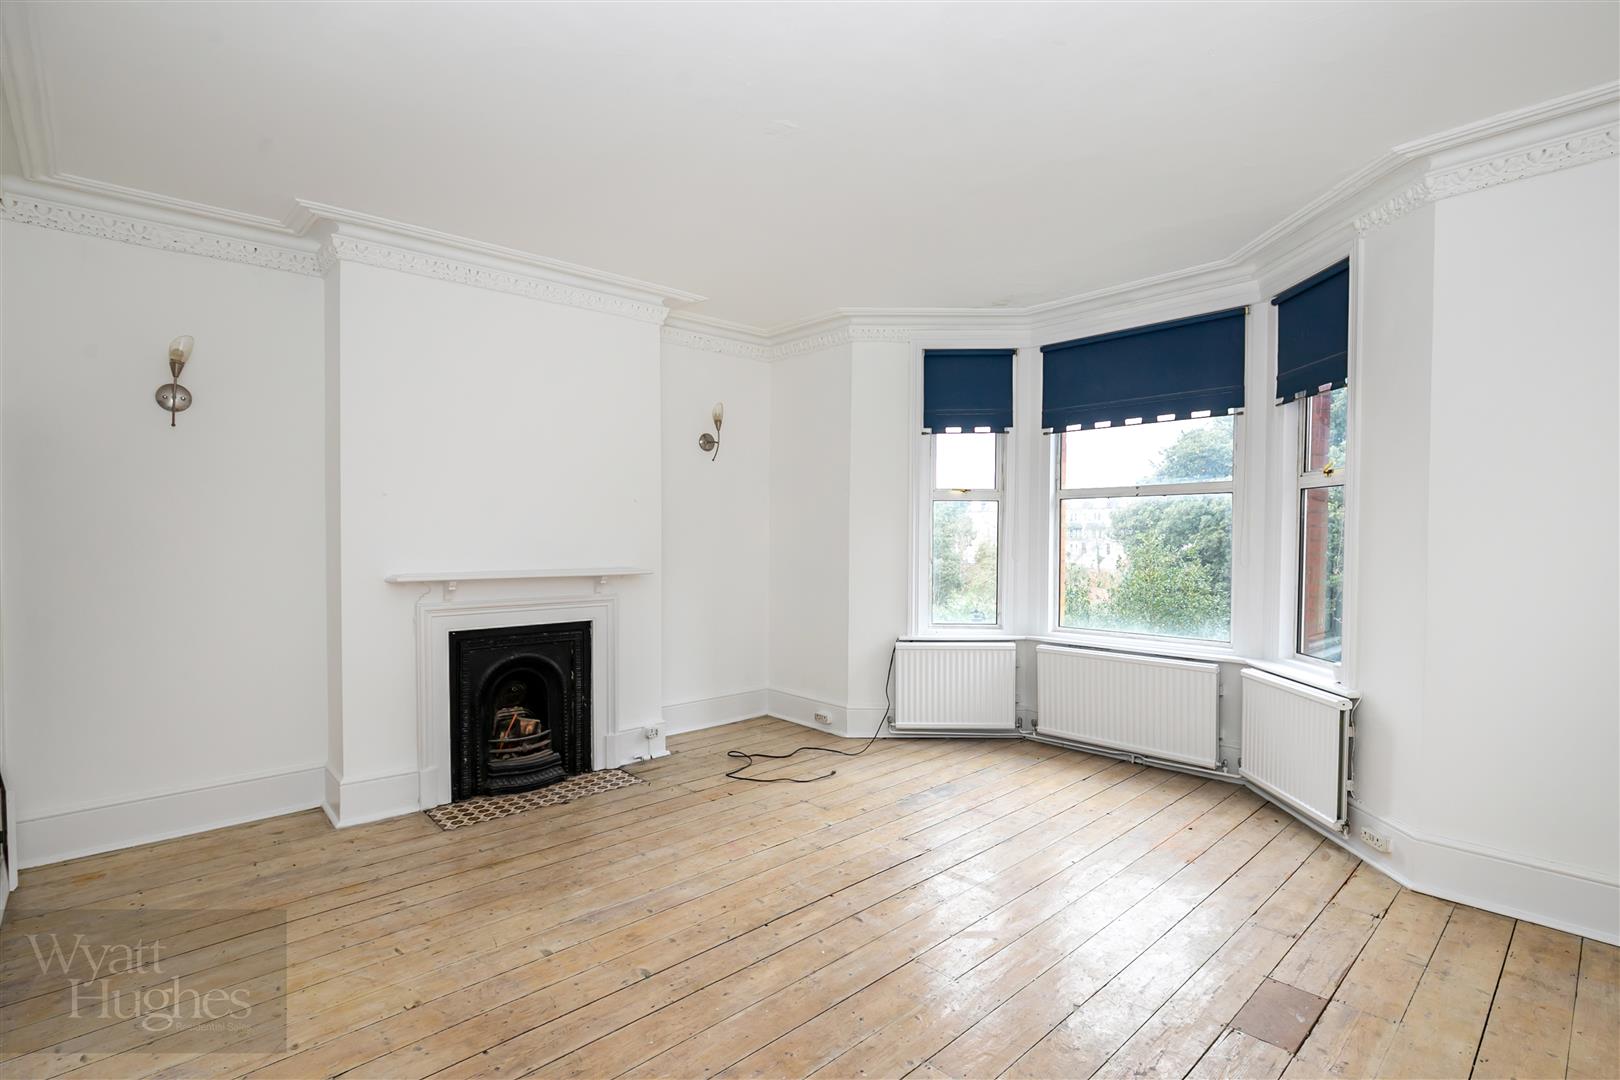 5 bed flat for sale in Lower Park Road, Hastings - Property Image 1